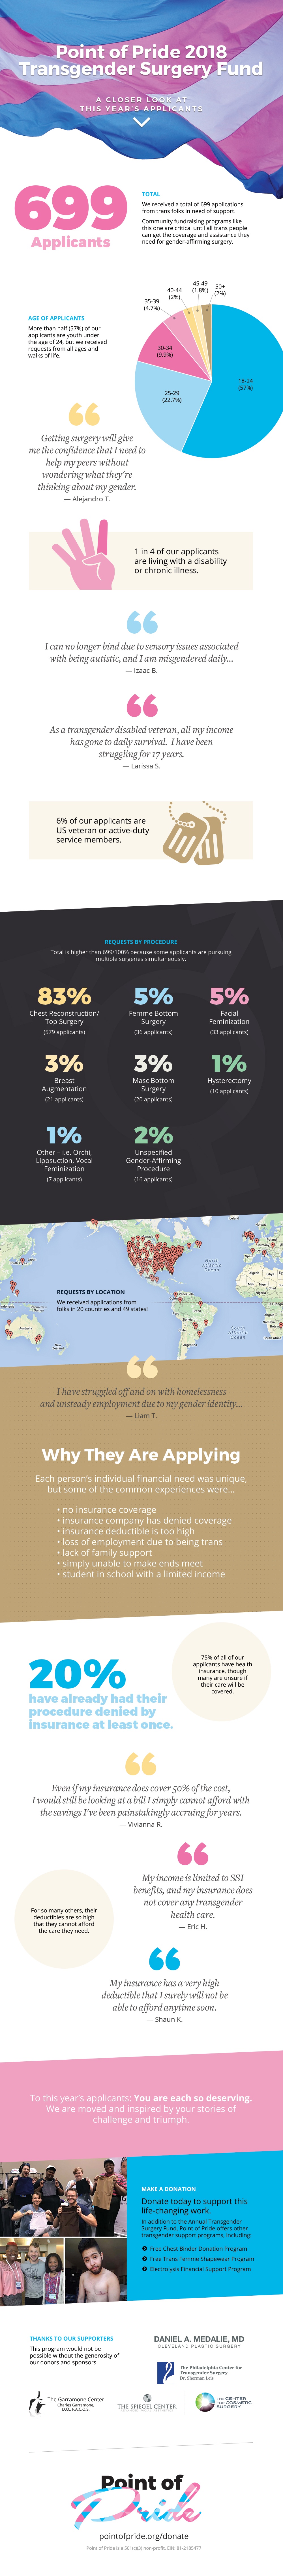 2018 Annual Transgender Surgery Fund: An Infographic of Our Applicants